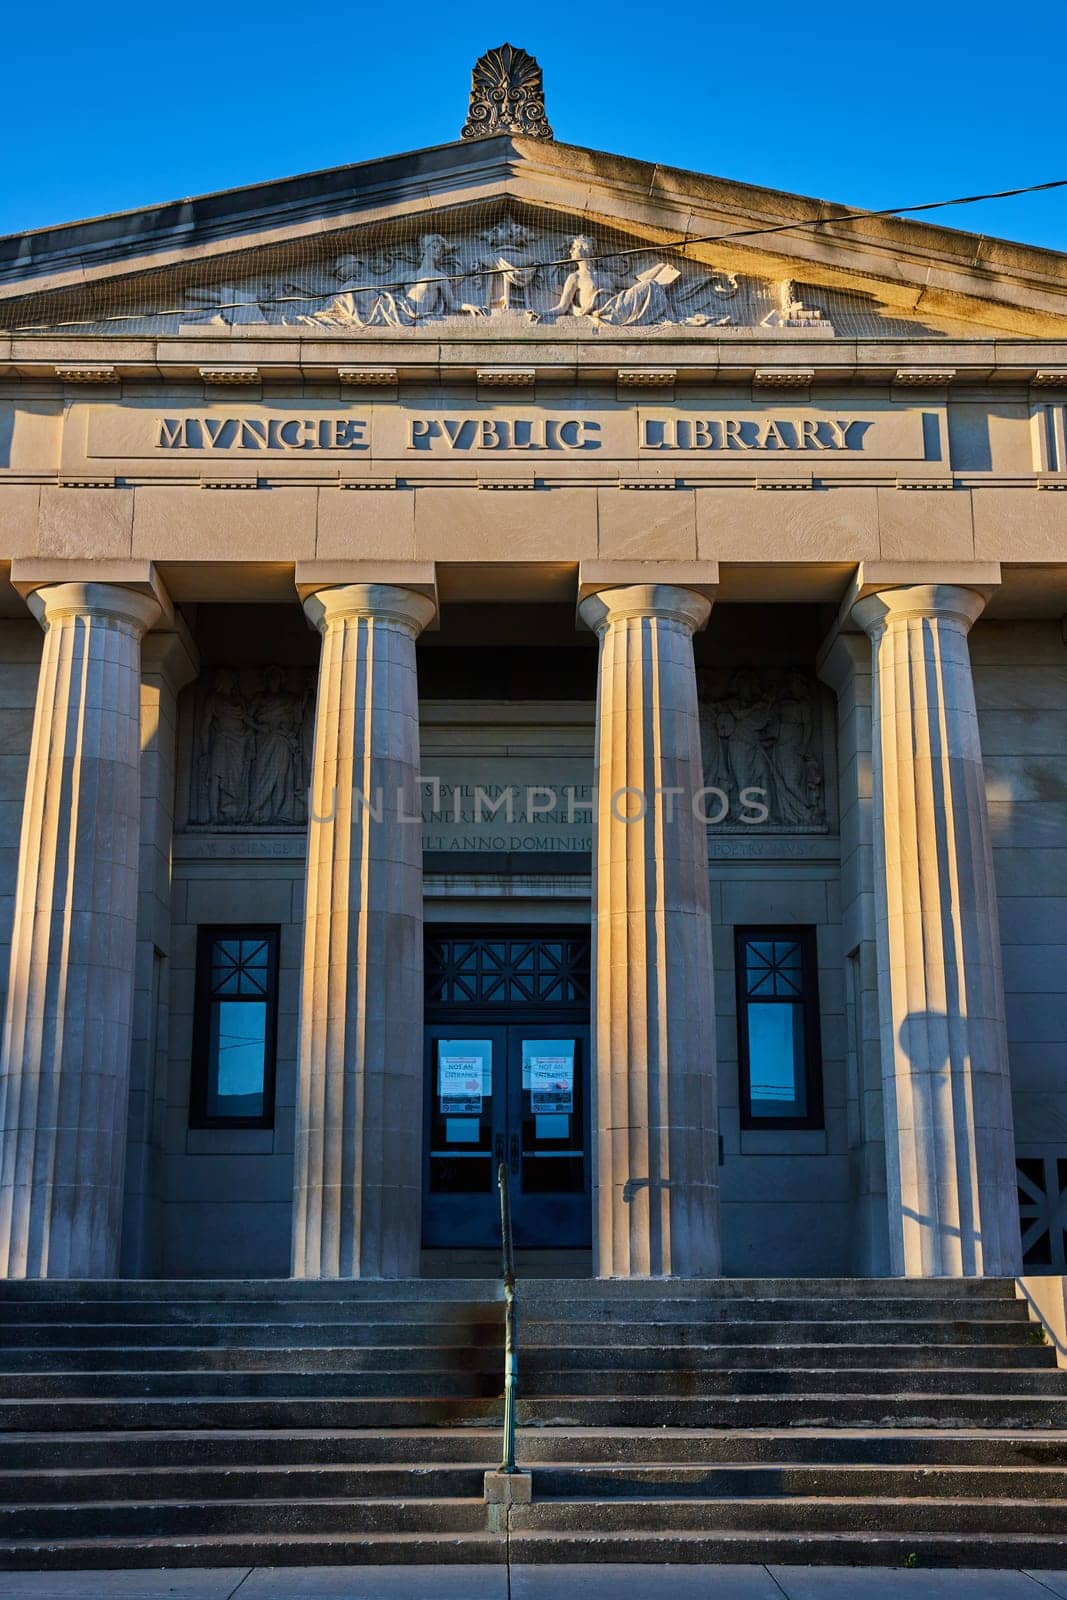 Majestic Sunrise at Muncie Public Library, Historic Carnegie-funded Building in Indiana